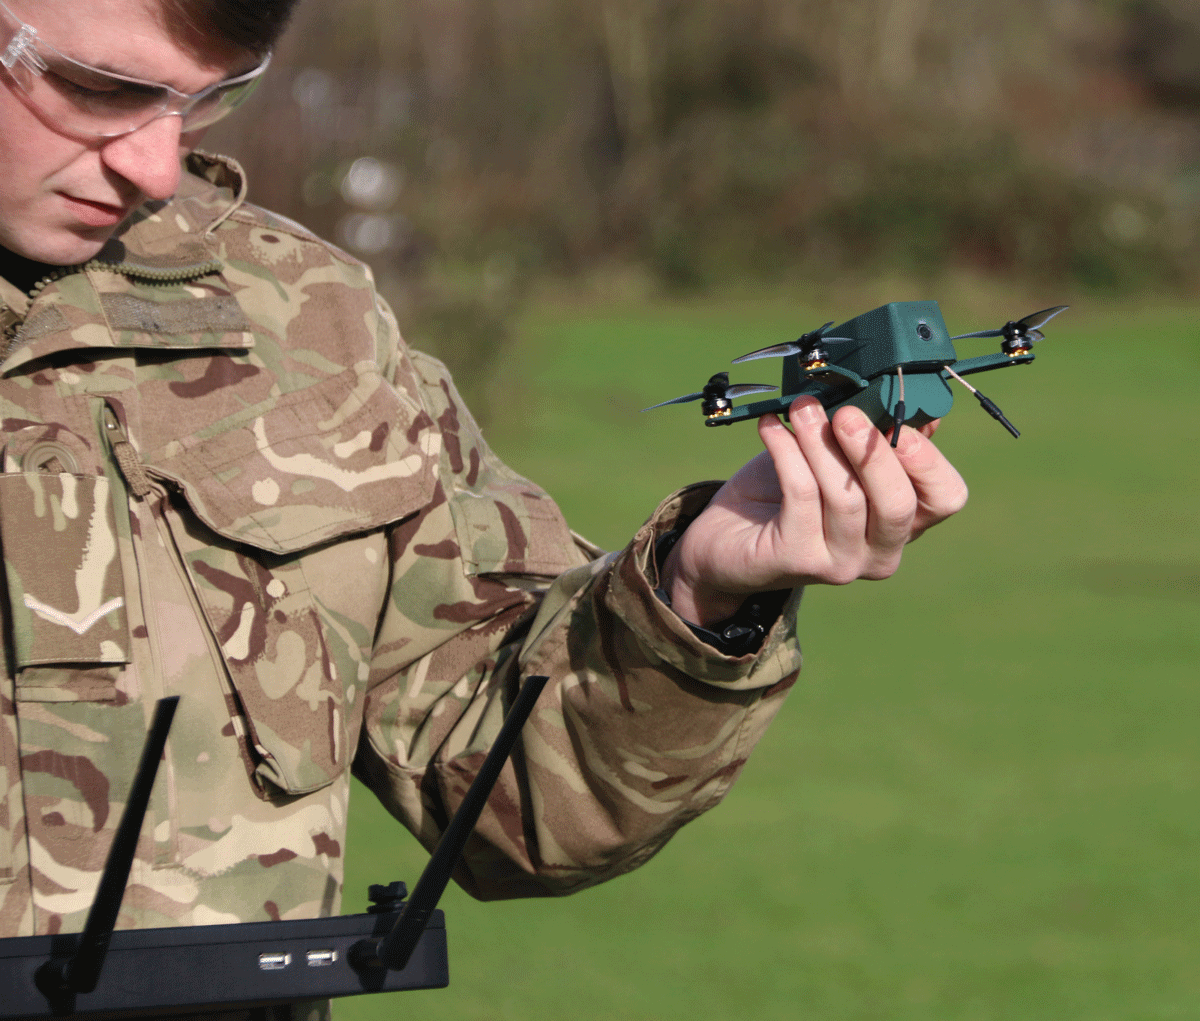 The nano drone weighs 196g, can fly at up to 50mph and has a range of more than a mile